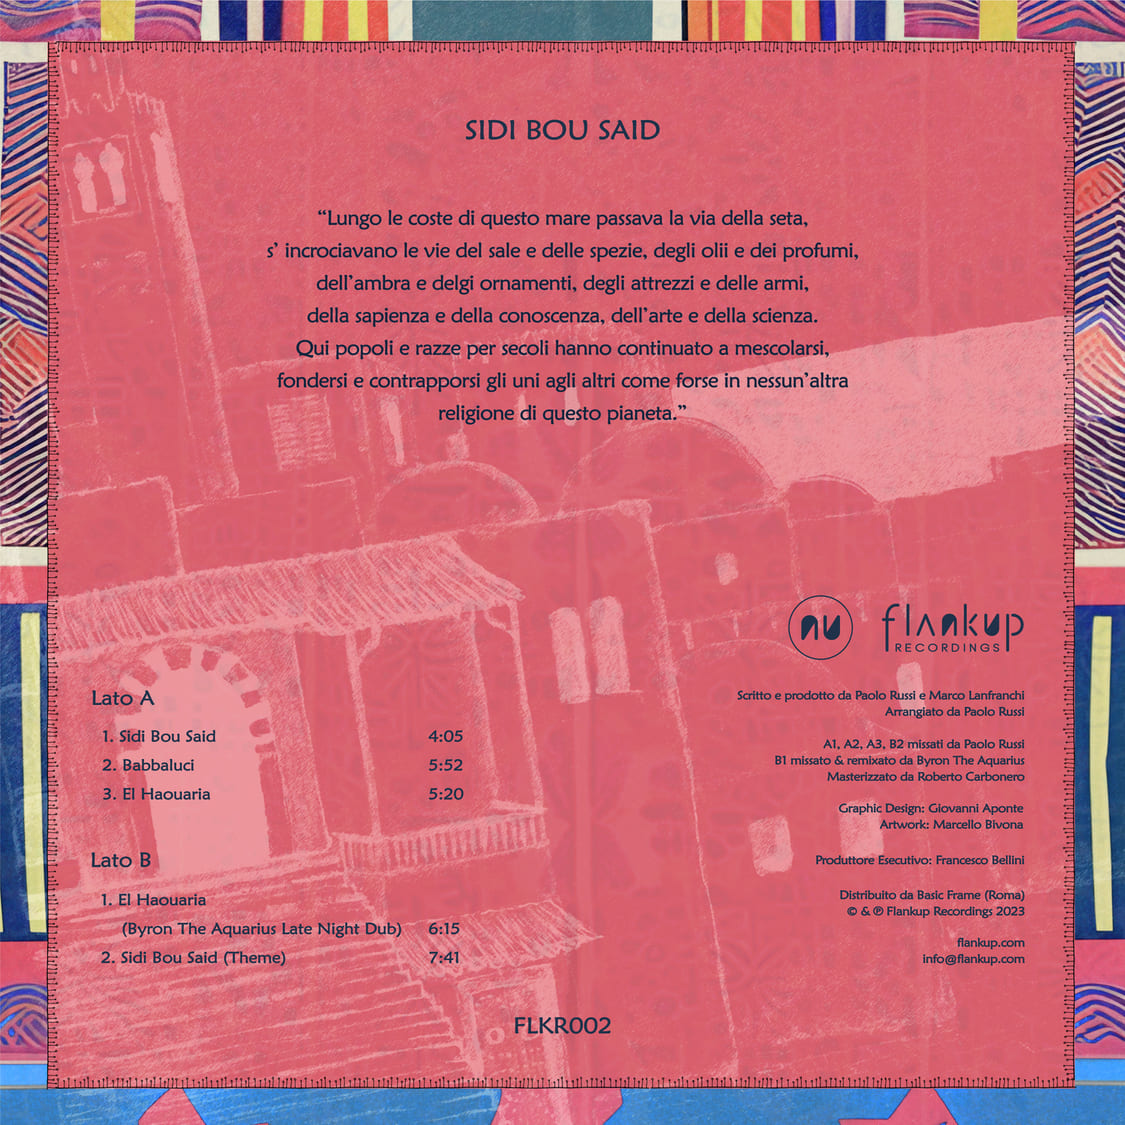 Sidi Bou Said EP vinyl cover. Disco and Afro Balearic beats blend seamlessly on Flankup Recordings (FLKR002).